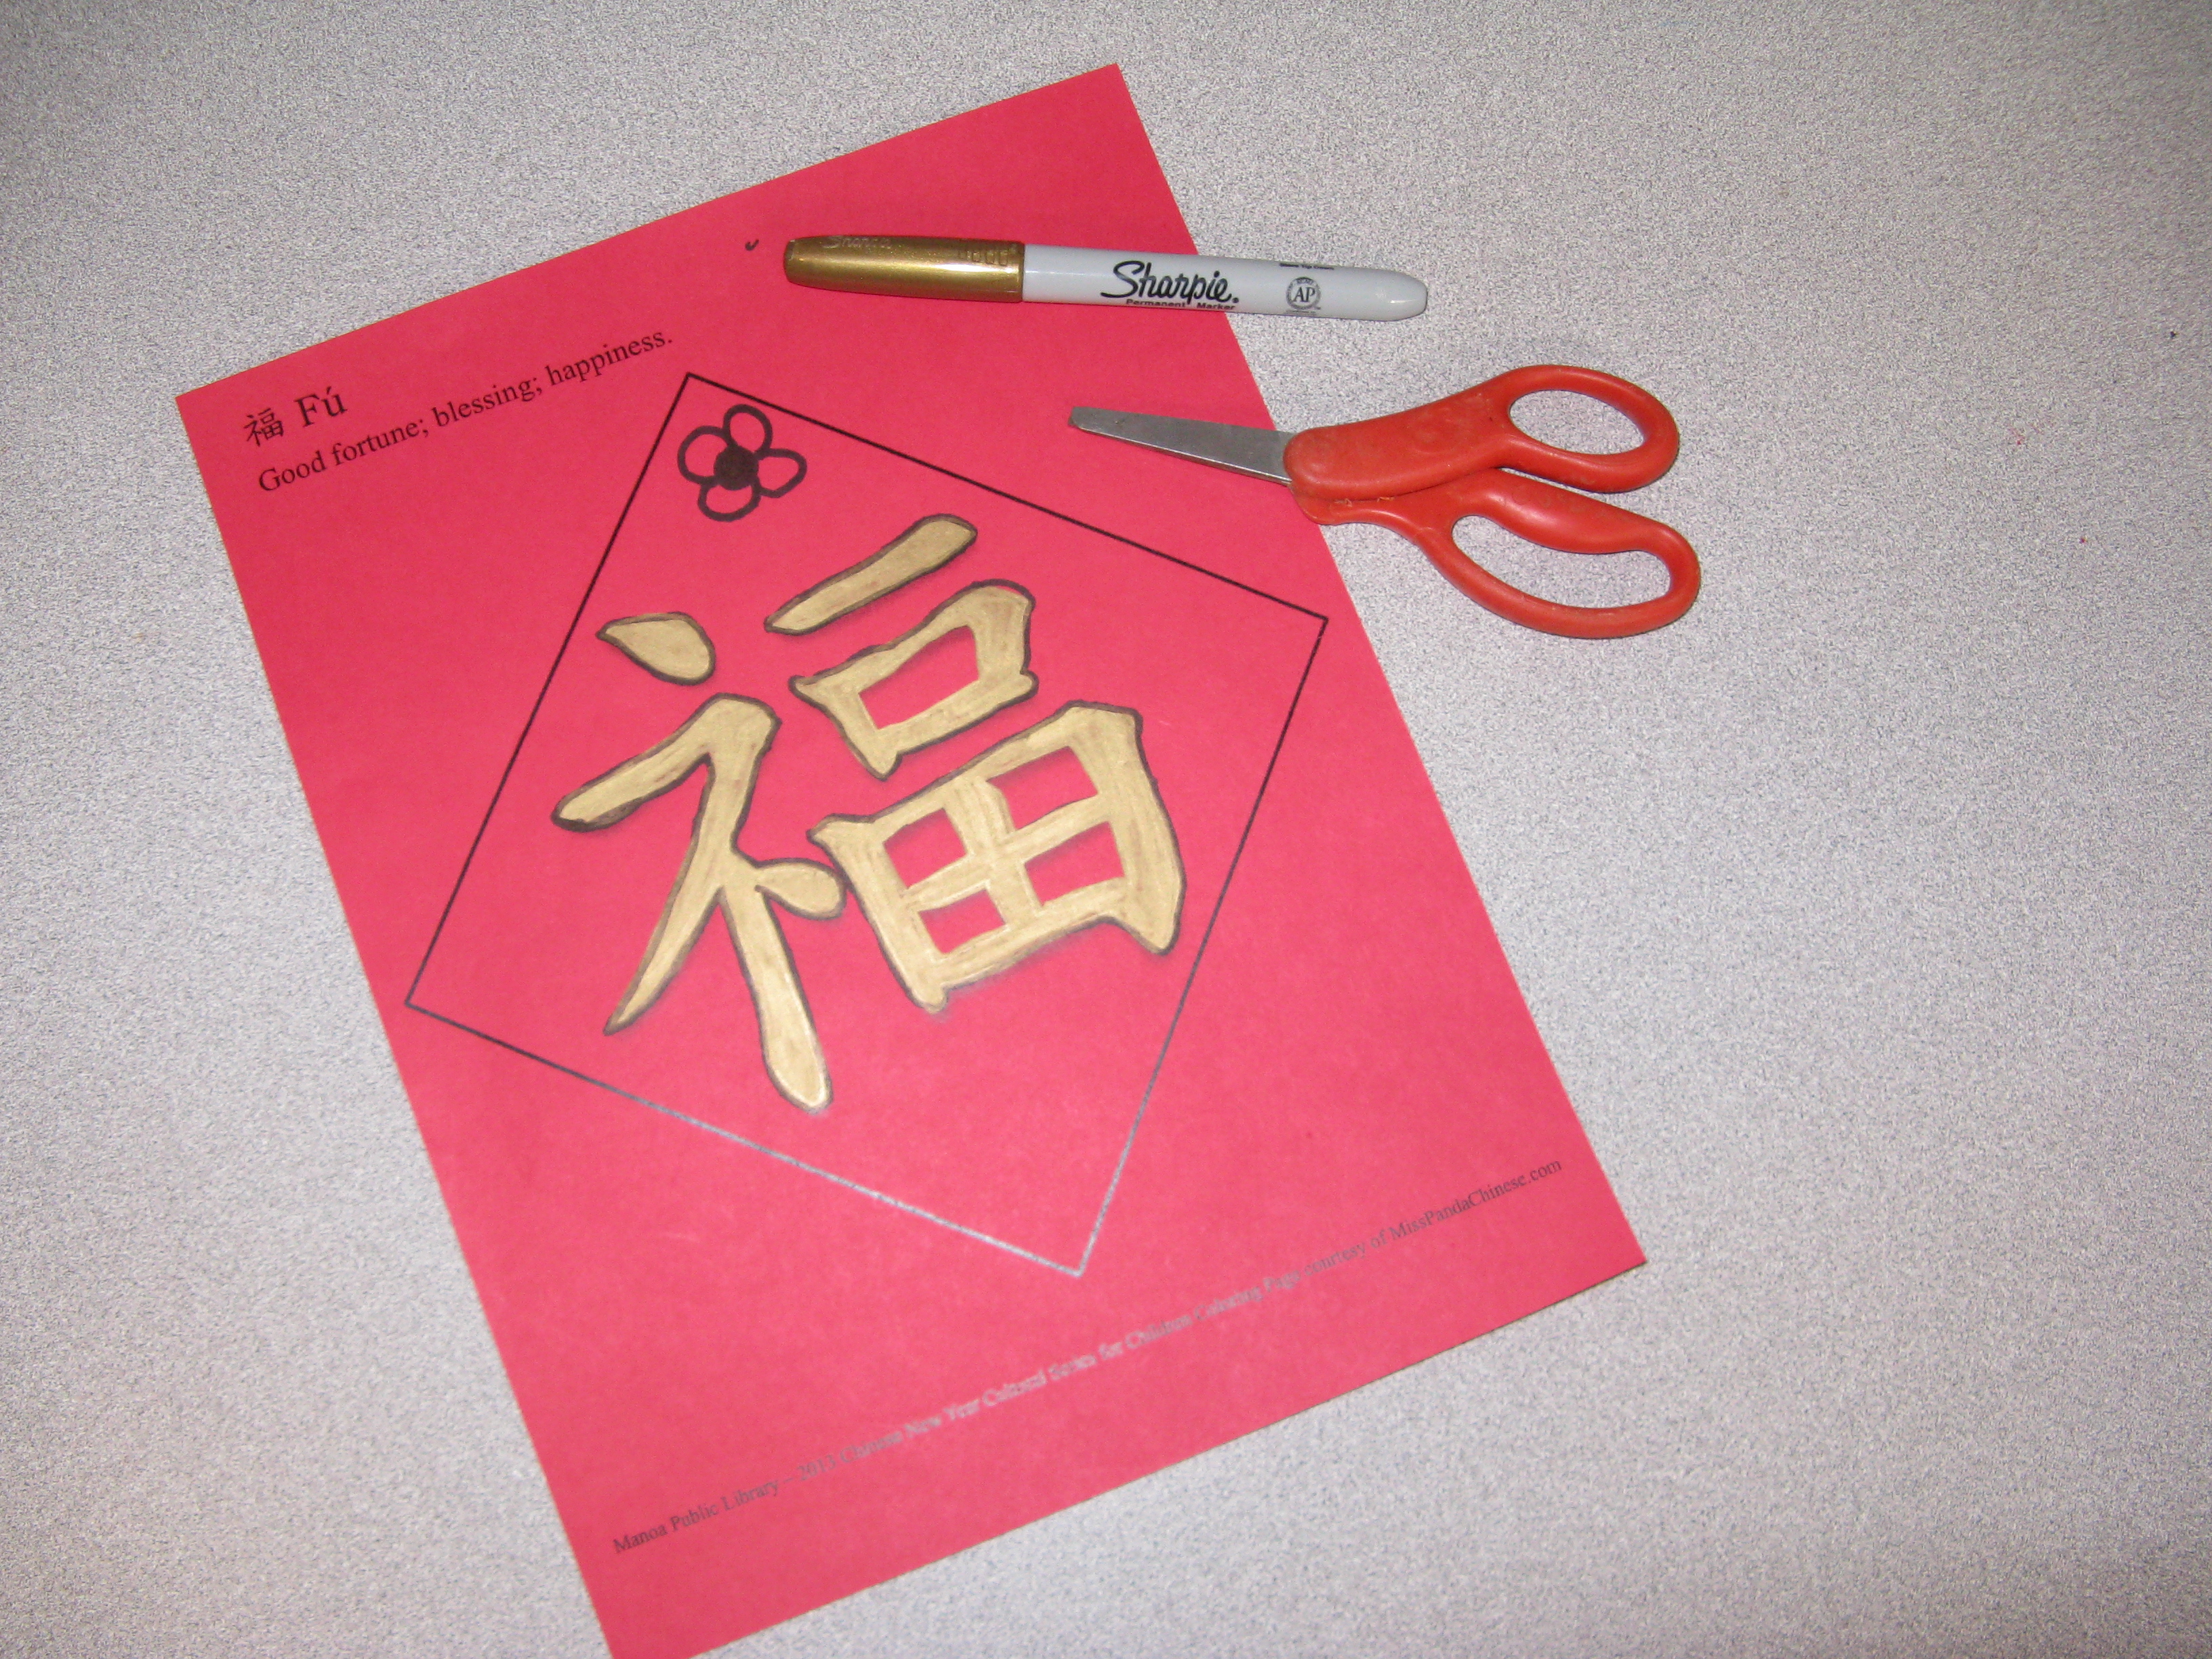 How to write happy chinese new year in chinese characters